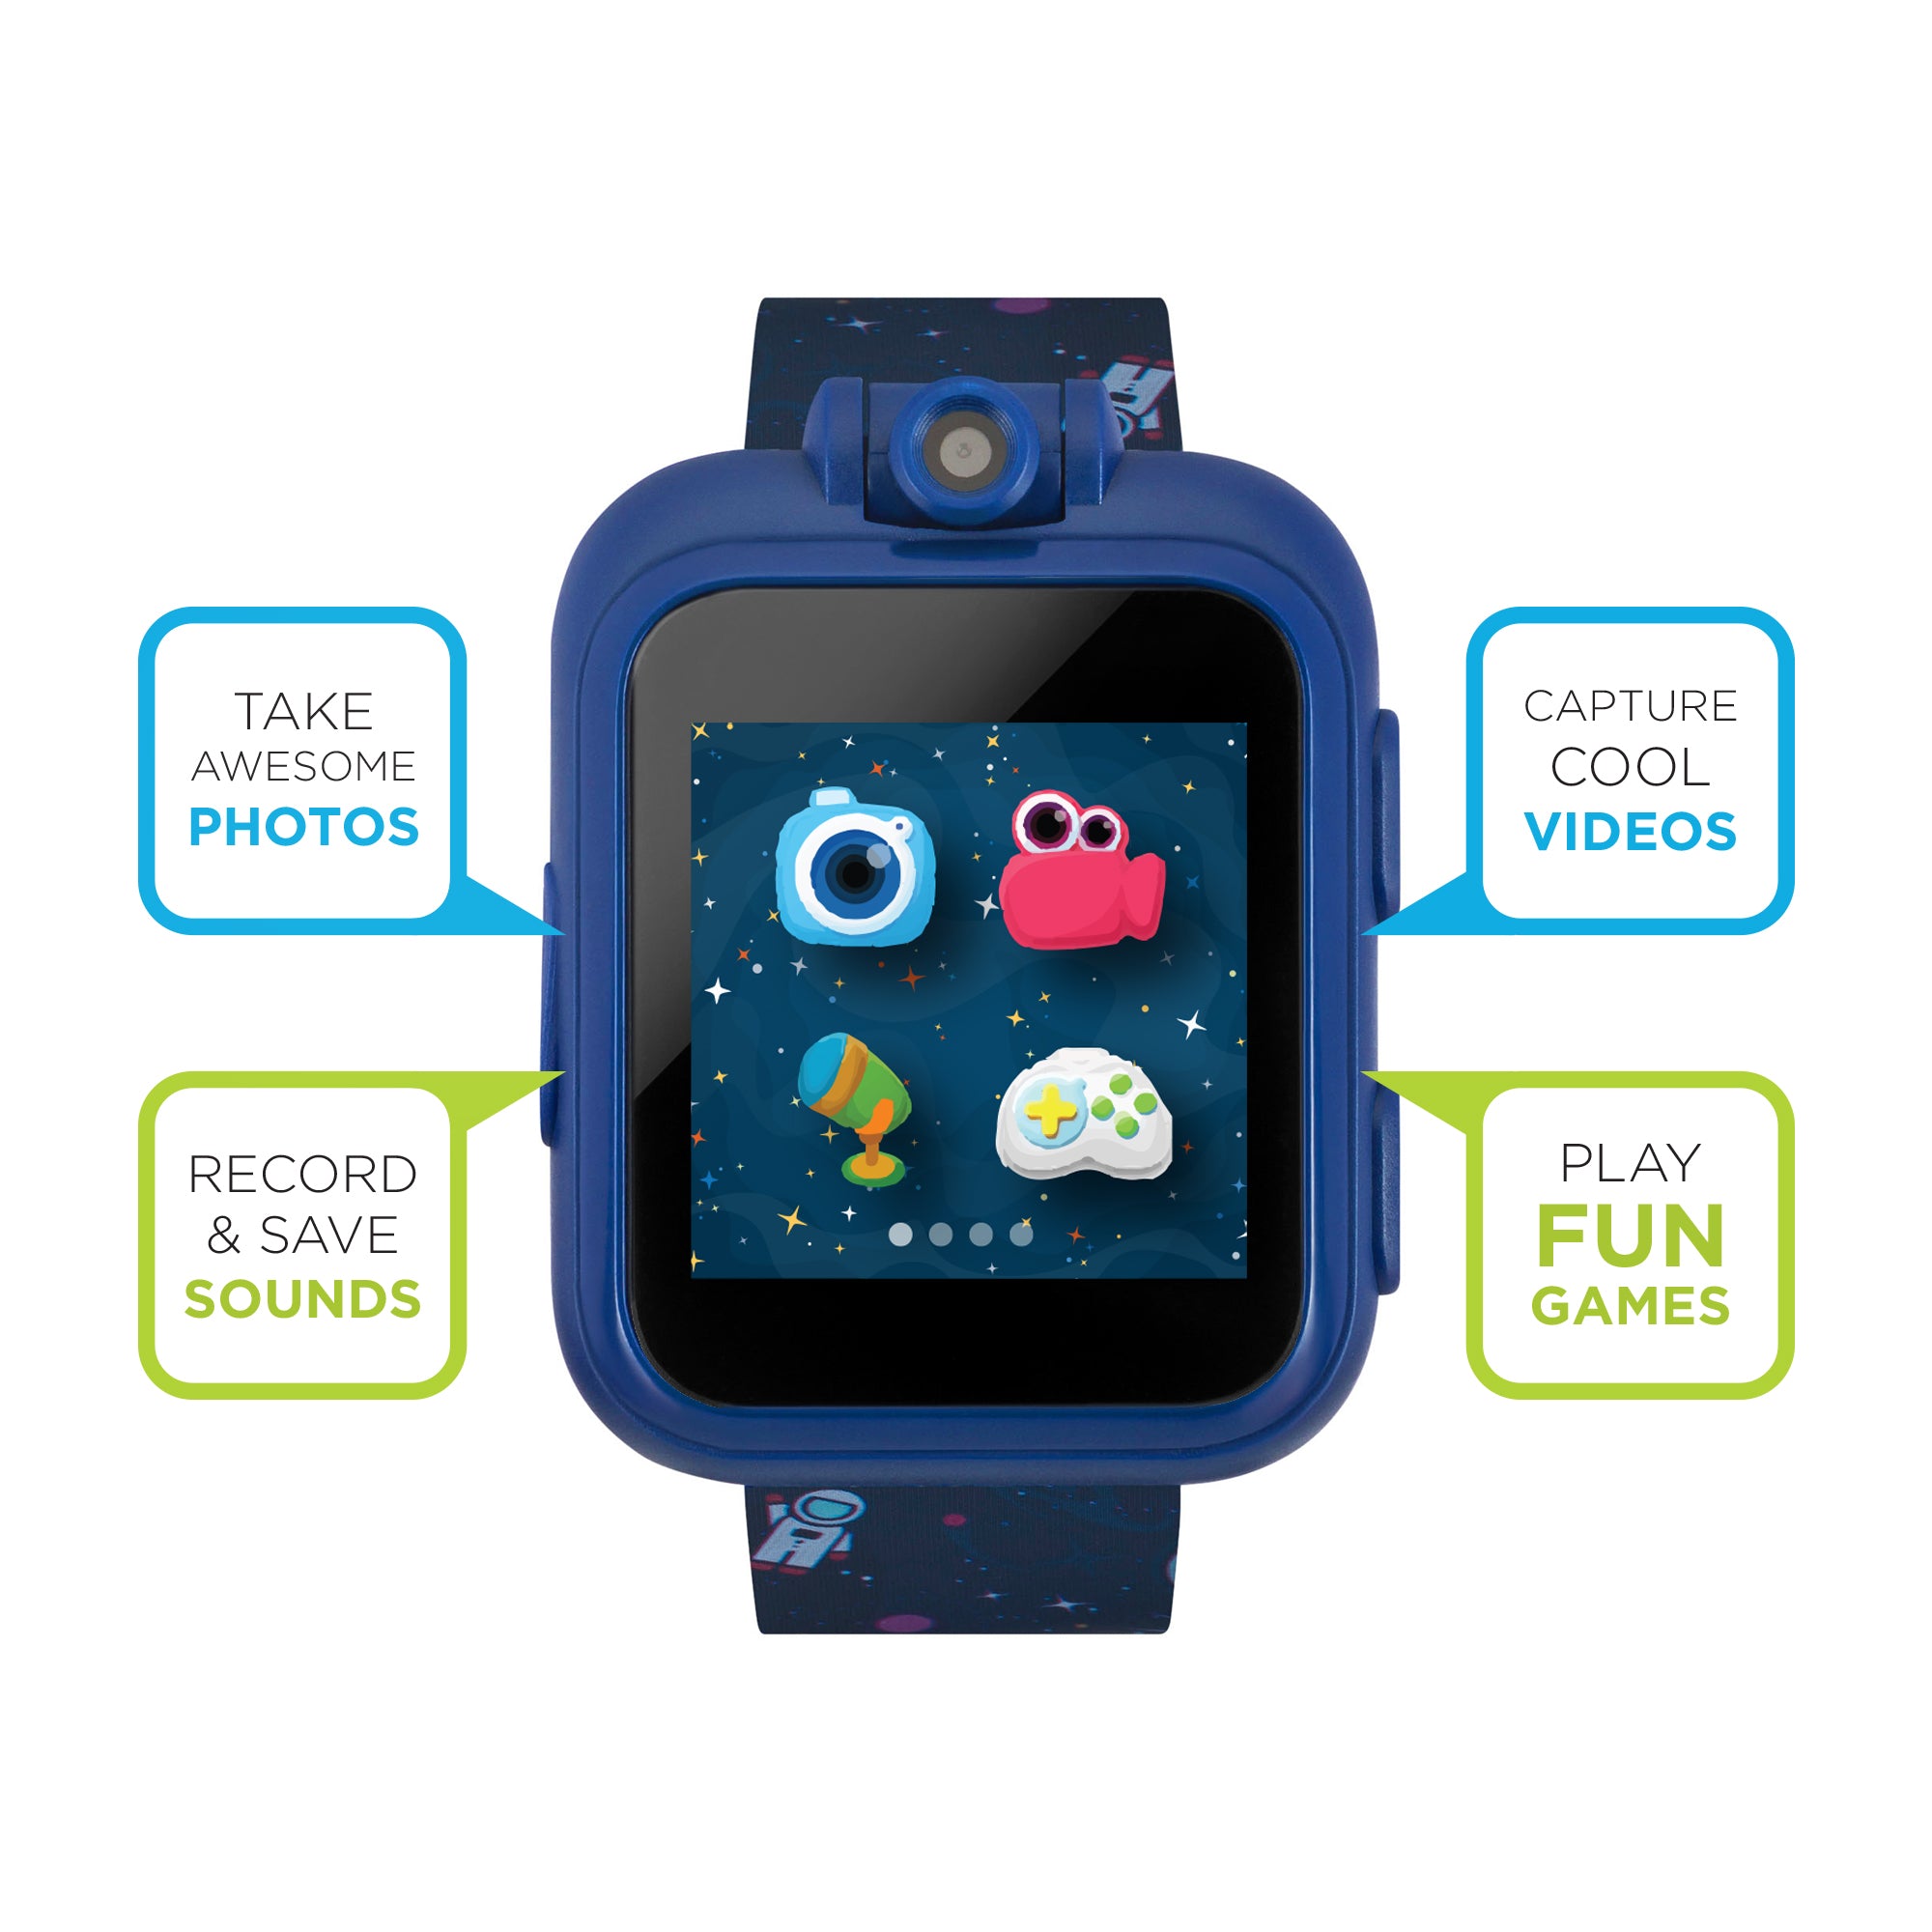 PlayZoom Smartwatch for Kids: Space Print affordable smart watch